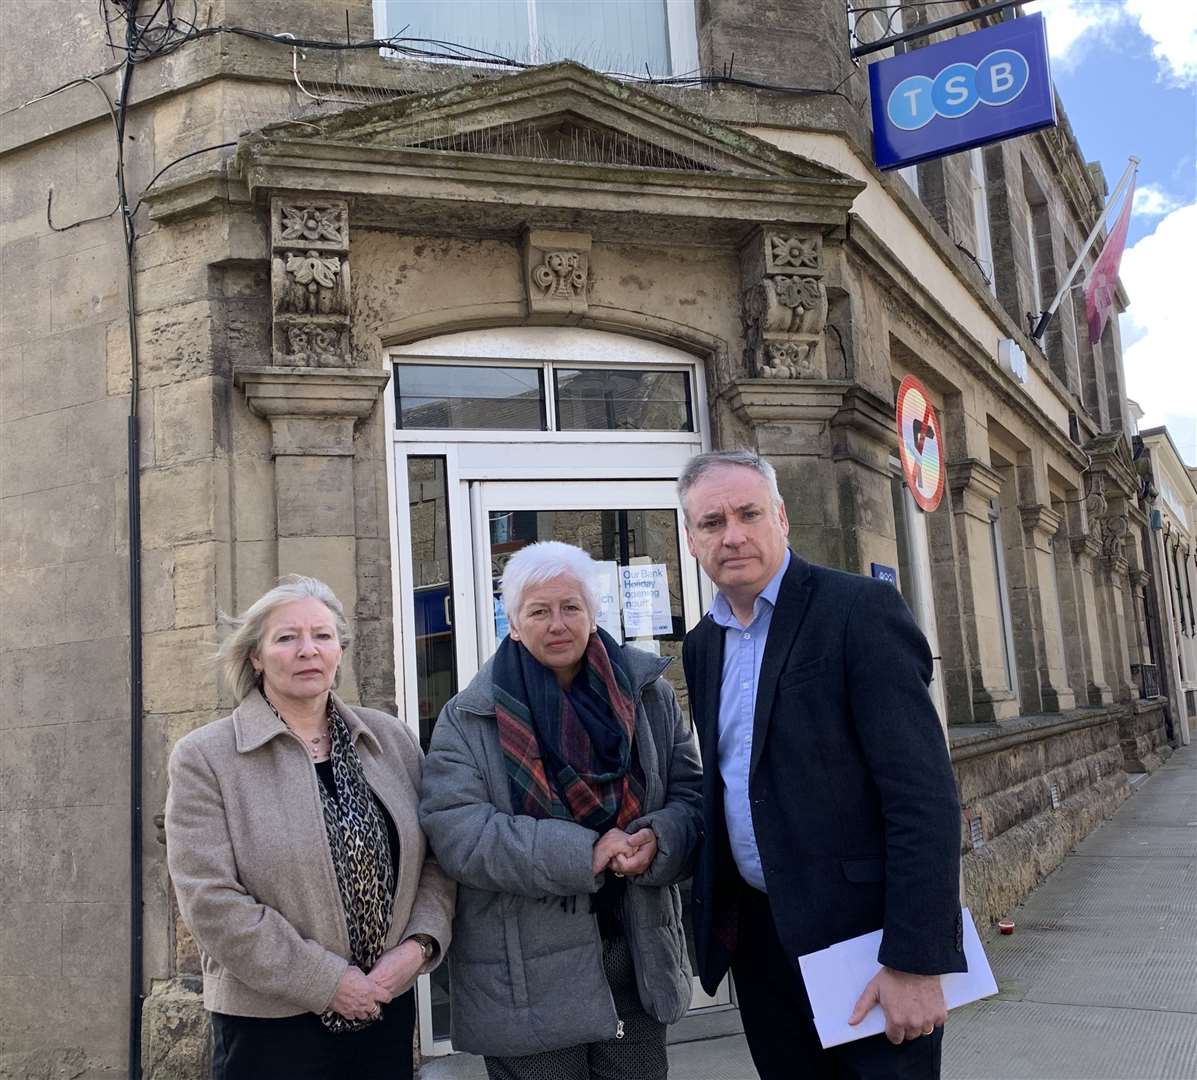 From left, Councillor Theresa Coull, TSB branch distribution director for Scotland Carol Anderson, and Richard Lochhead MSP outside the branch on Keith's Mid Street.